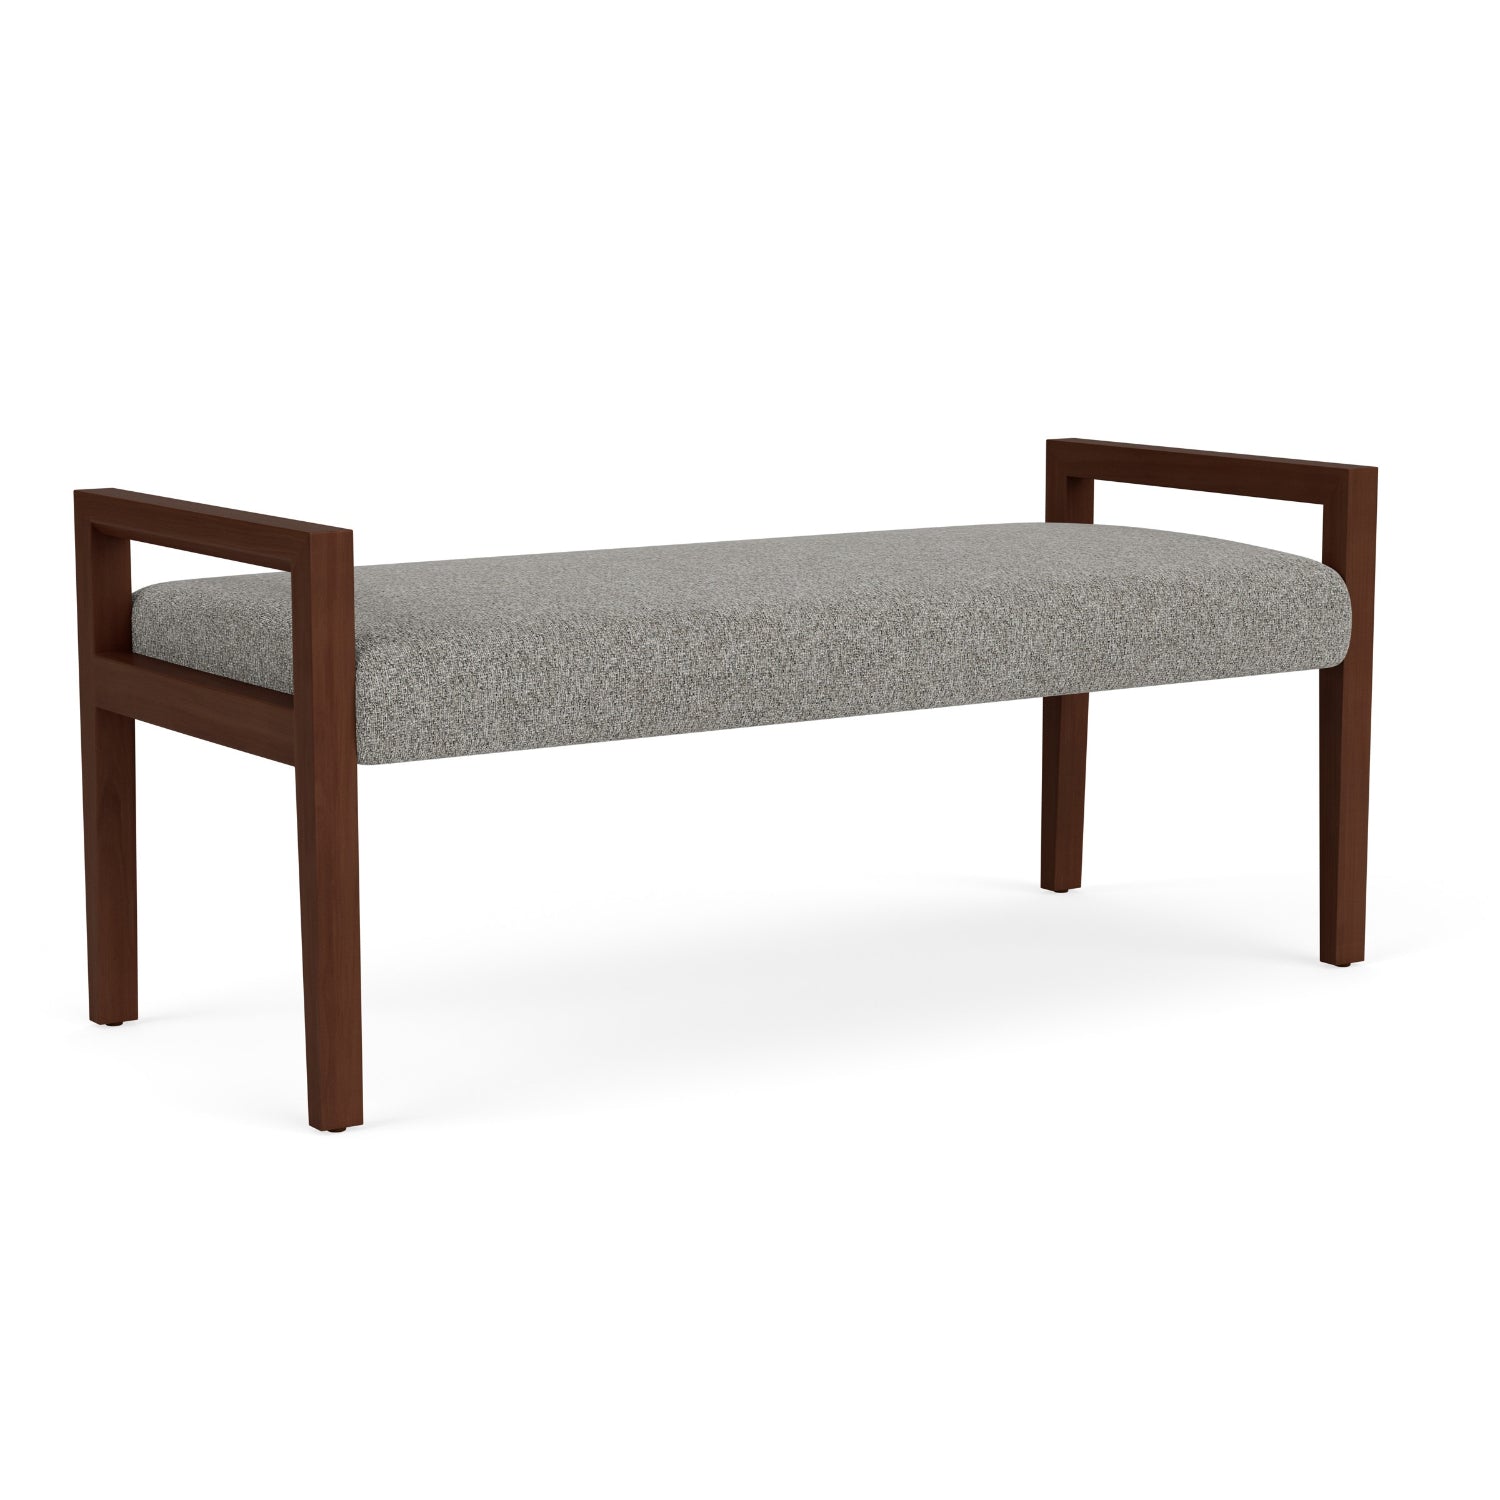 Brooklyn Collection Reception Seating, 2 Seat Bench, Standard Fabric Upholstery, FREE SHIPPING